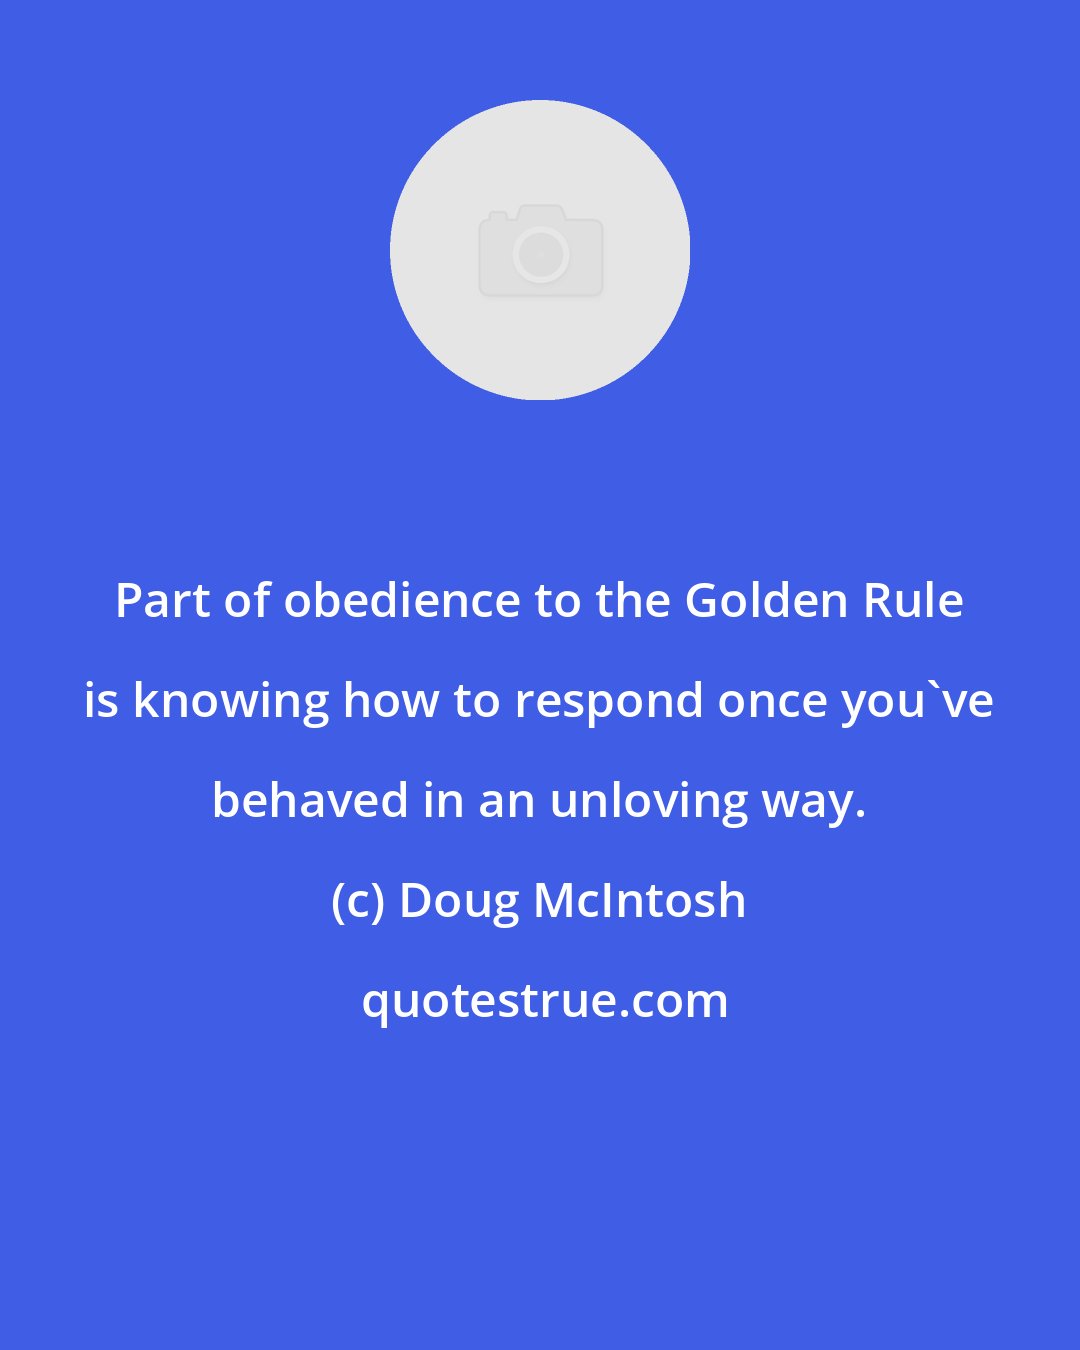 Doug McIntosh: Part of obedience to the Golden Rule is knowing how to respond once you've behaved in an unloving way.